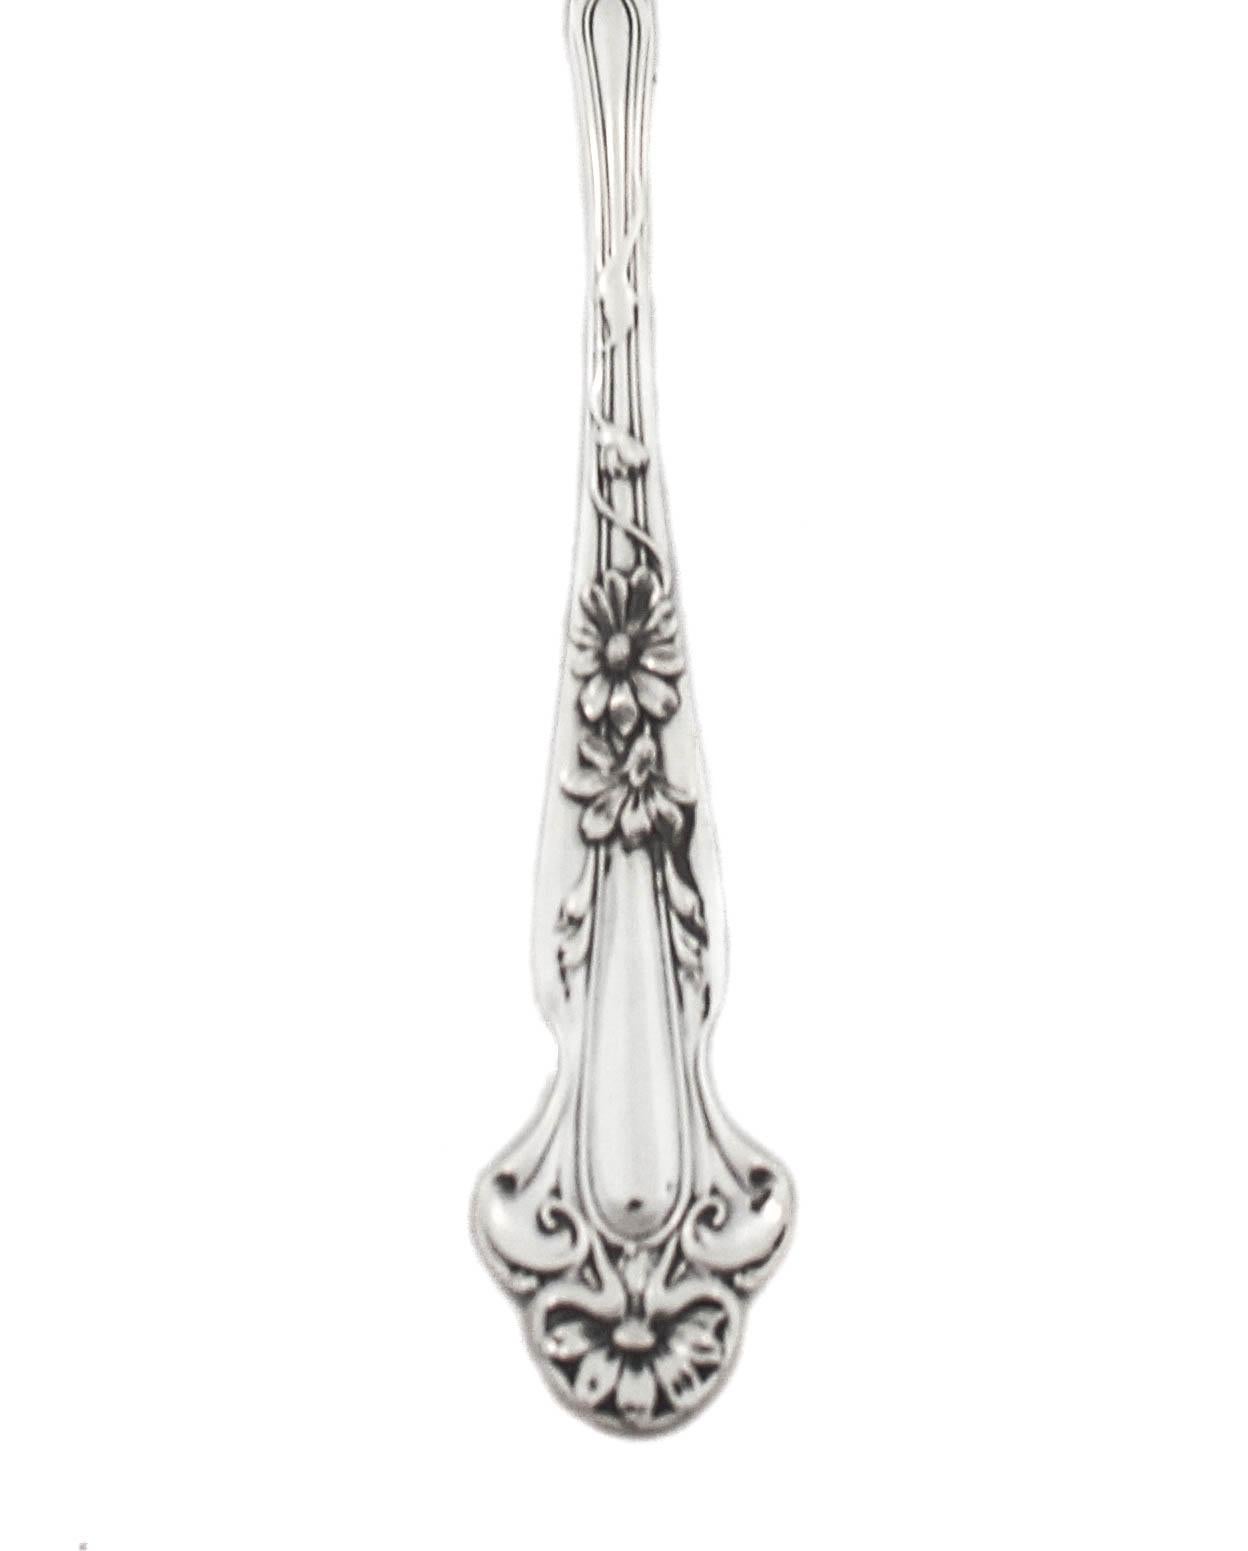 Pair of Sterling Silver Art Nouveau Serving Spoons In Excellent Condition For Sale In Brooklyn, NY